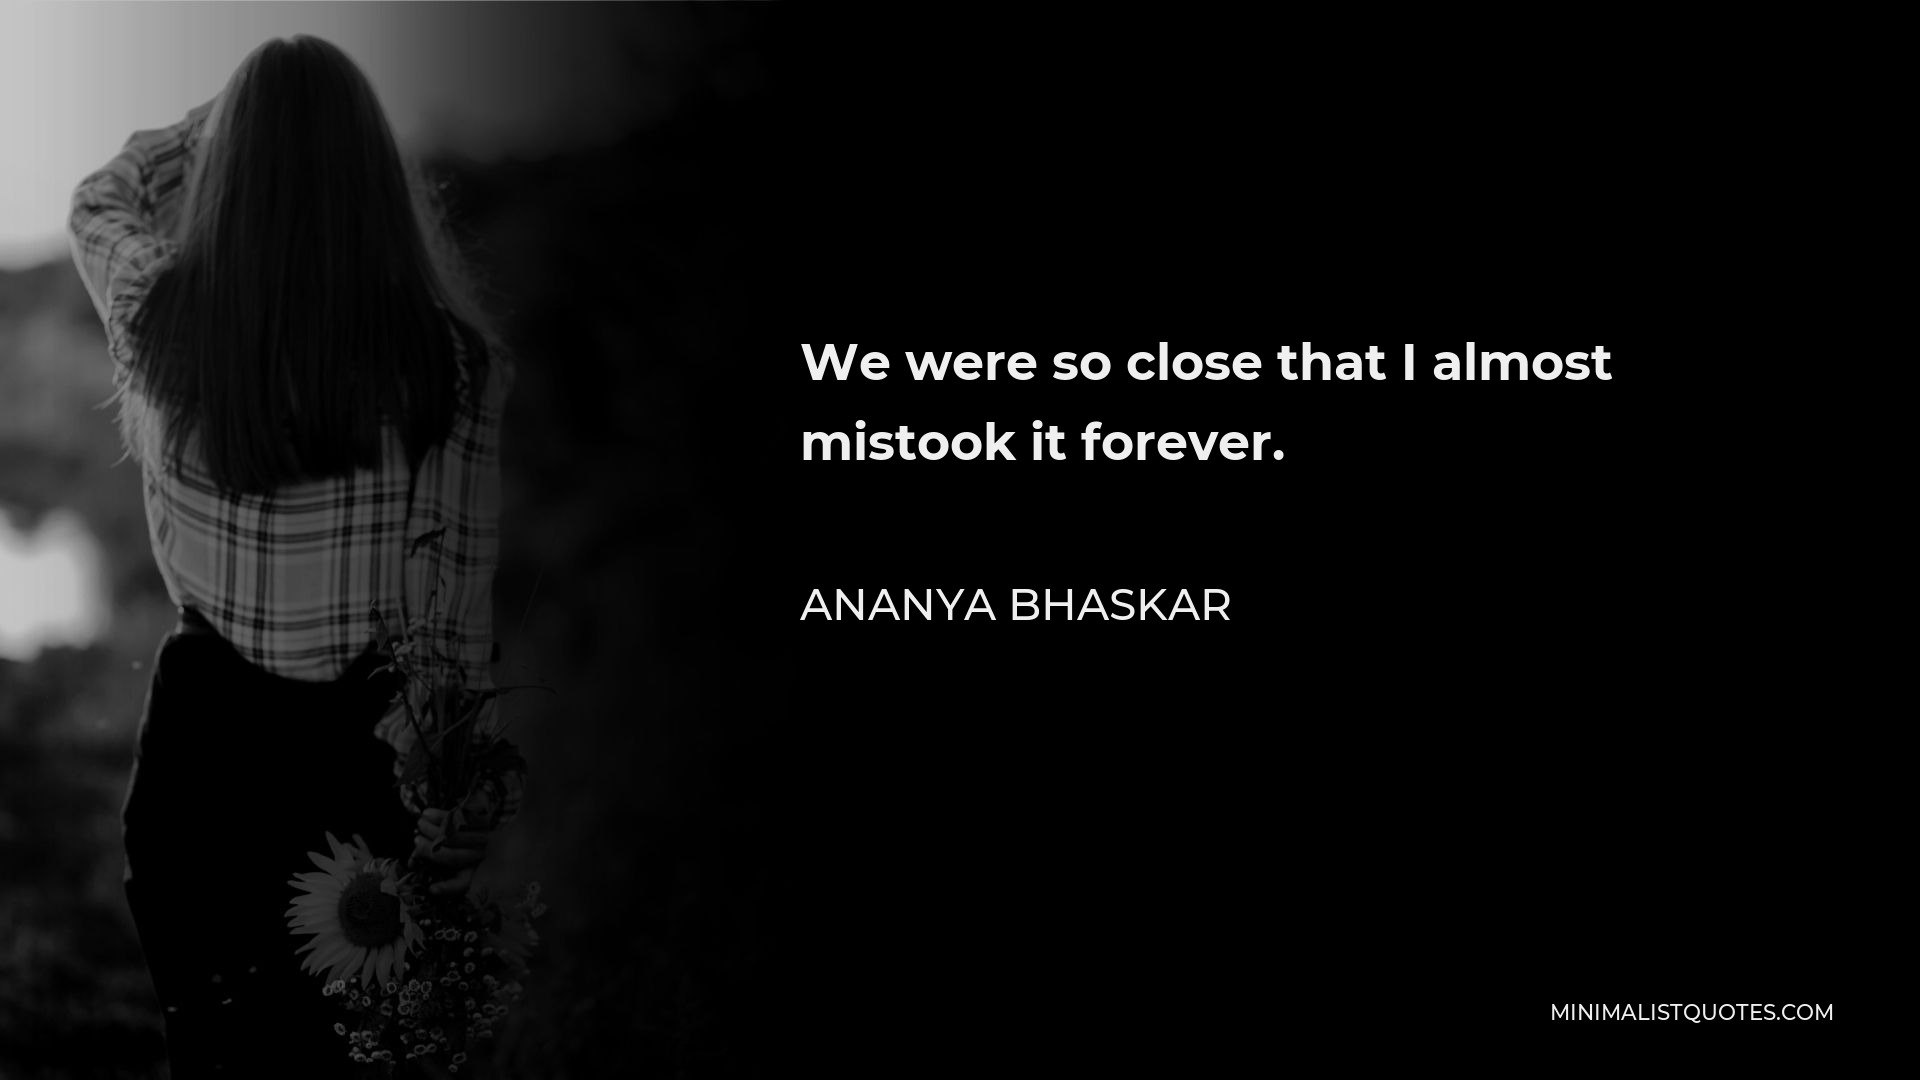 Ananya Bhaskar Quote - We were so close that I almost mistook it forever.